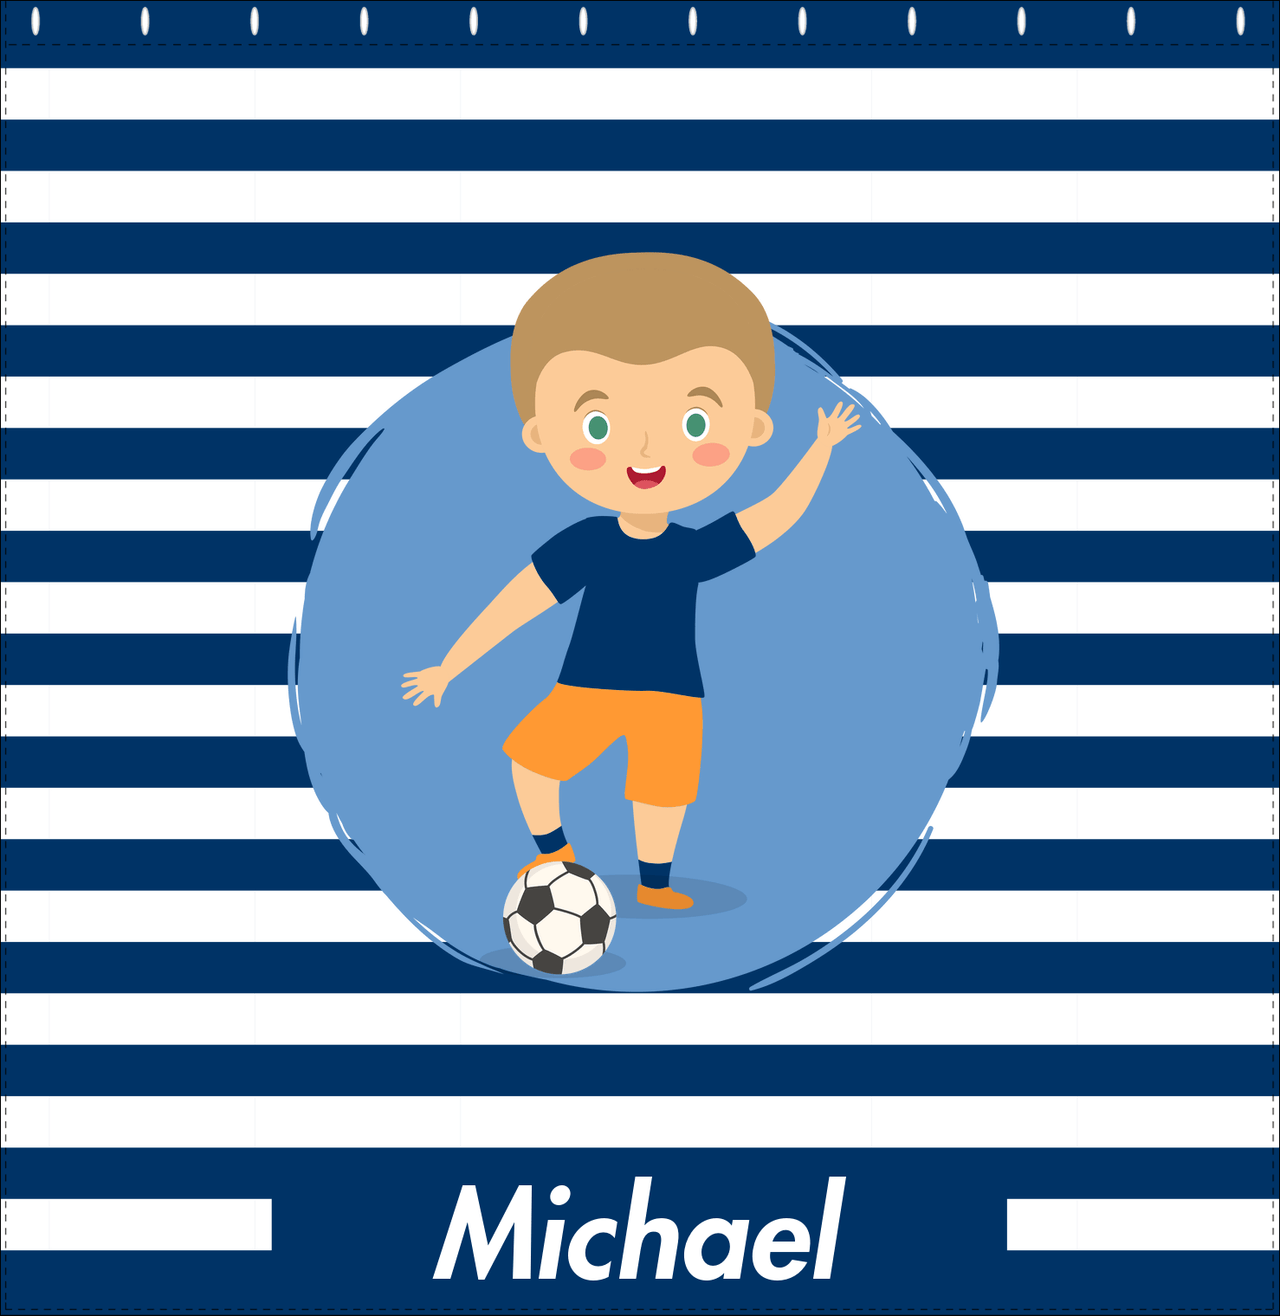 Personalized Soccer Shower Curtain XXIV - Blue Background - Blond Boy I - Decorate View